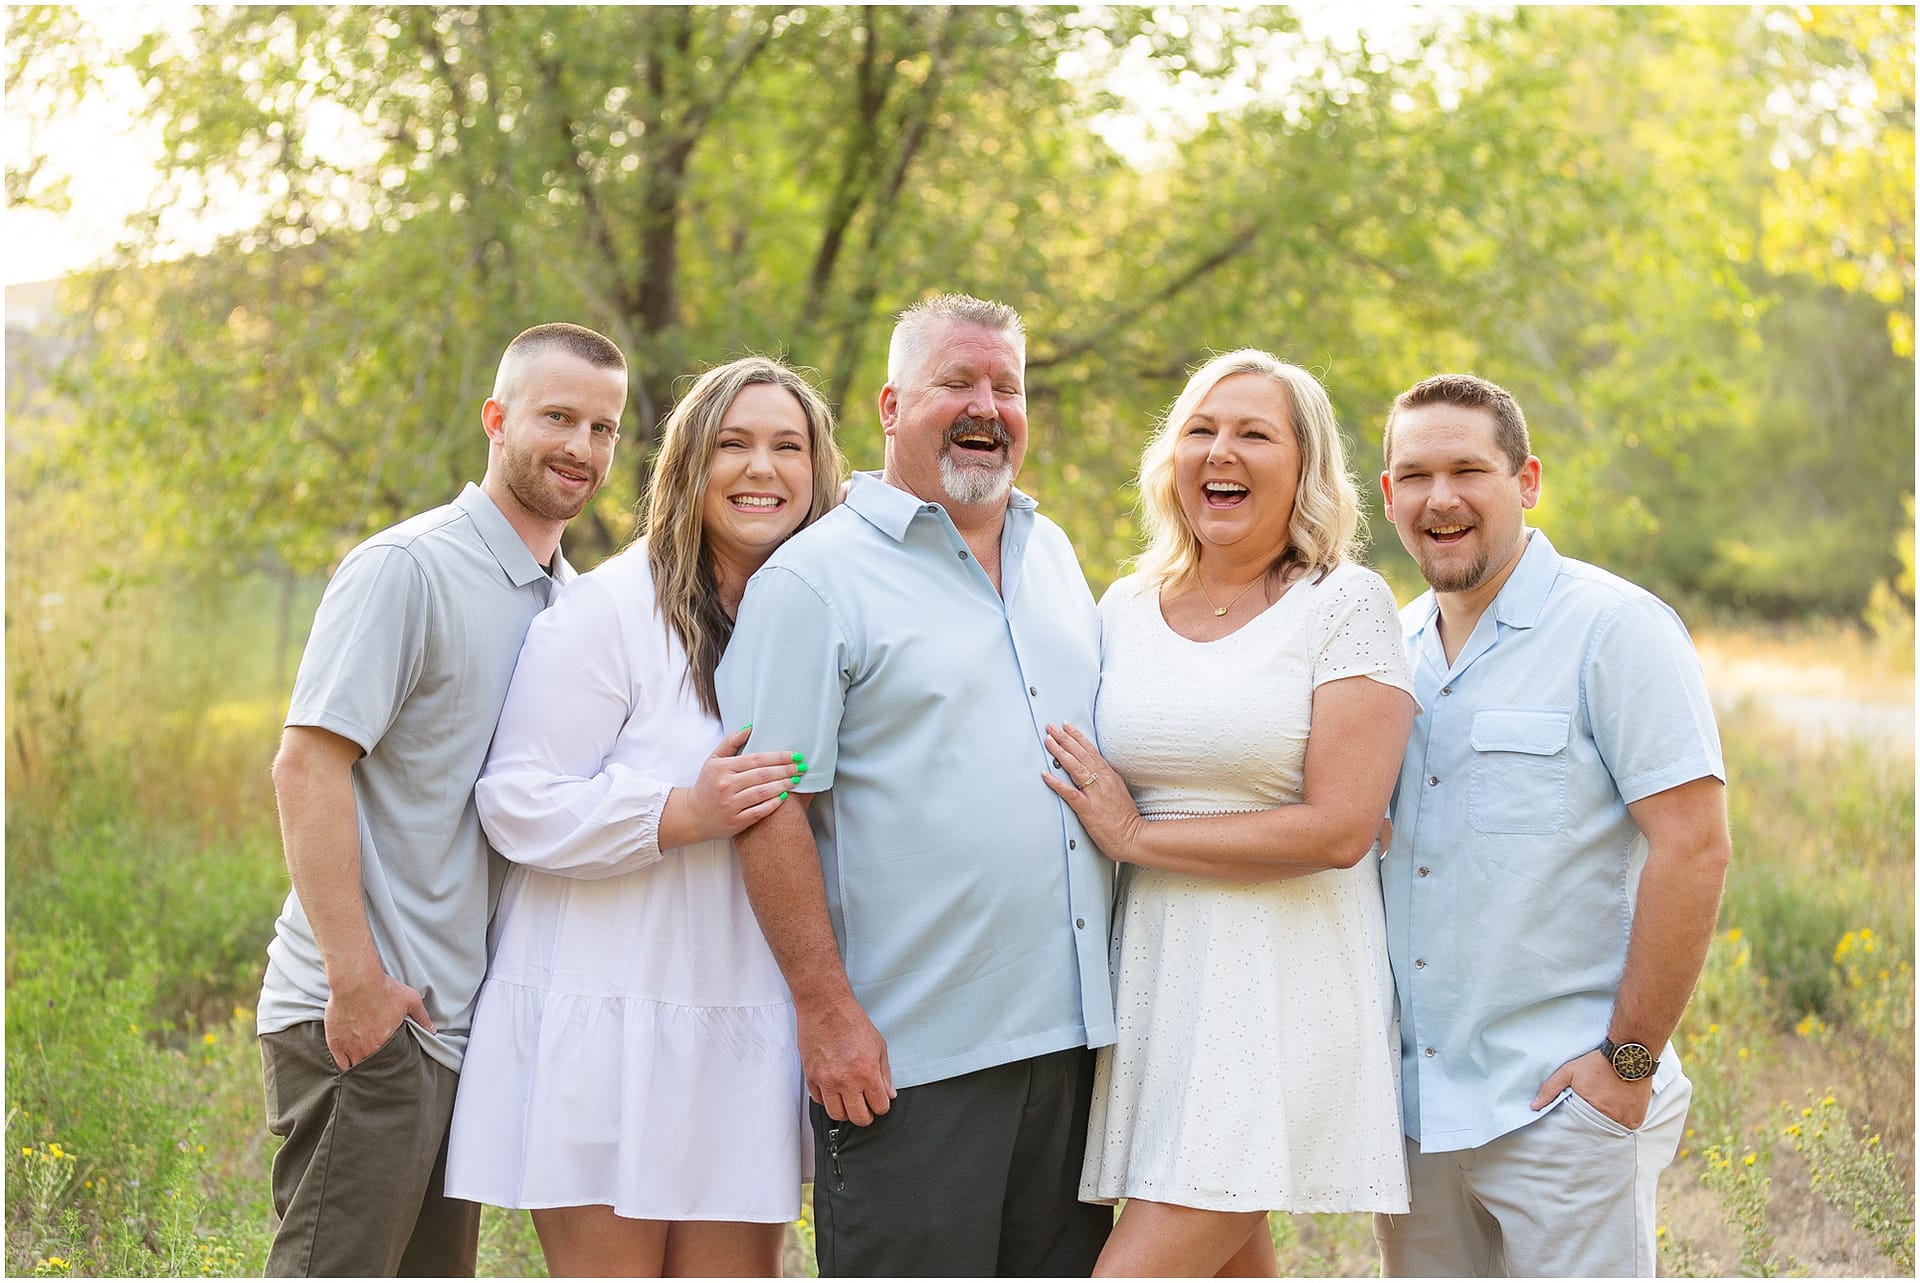 Family of five smiles during pregnancy announcement. Photo by Tiffany Hix Photography.